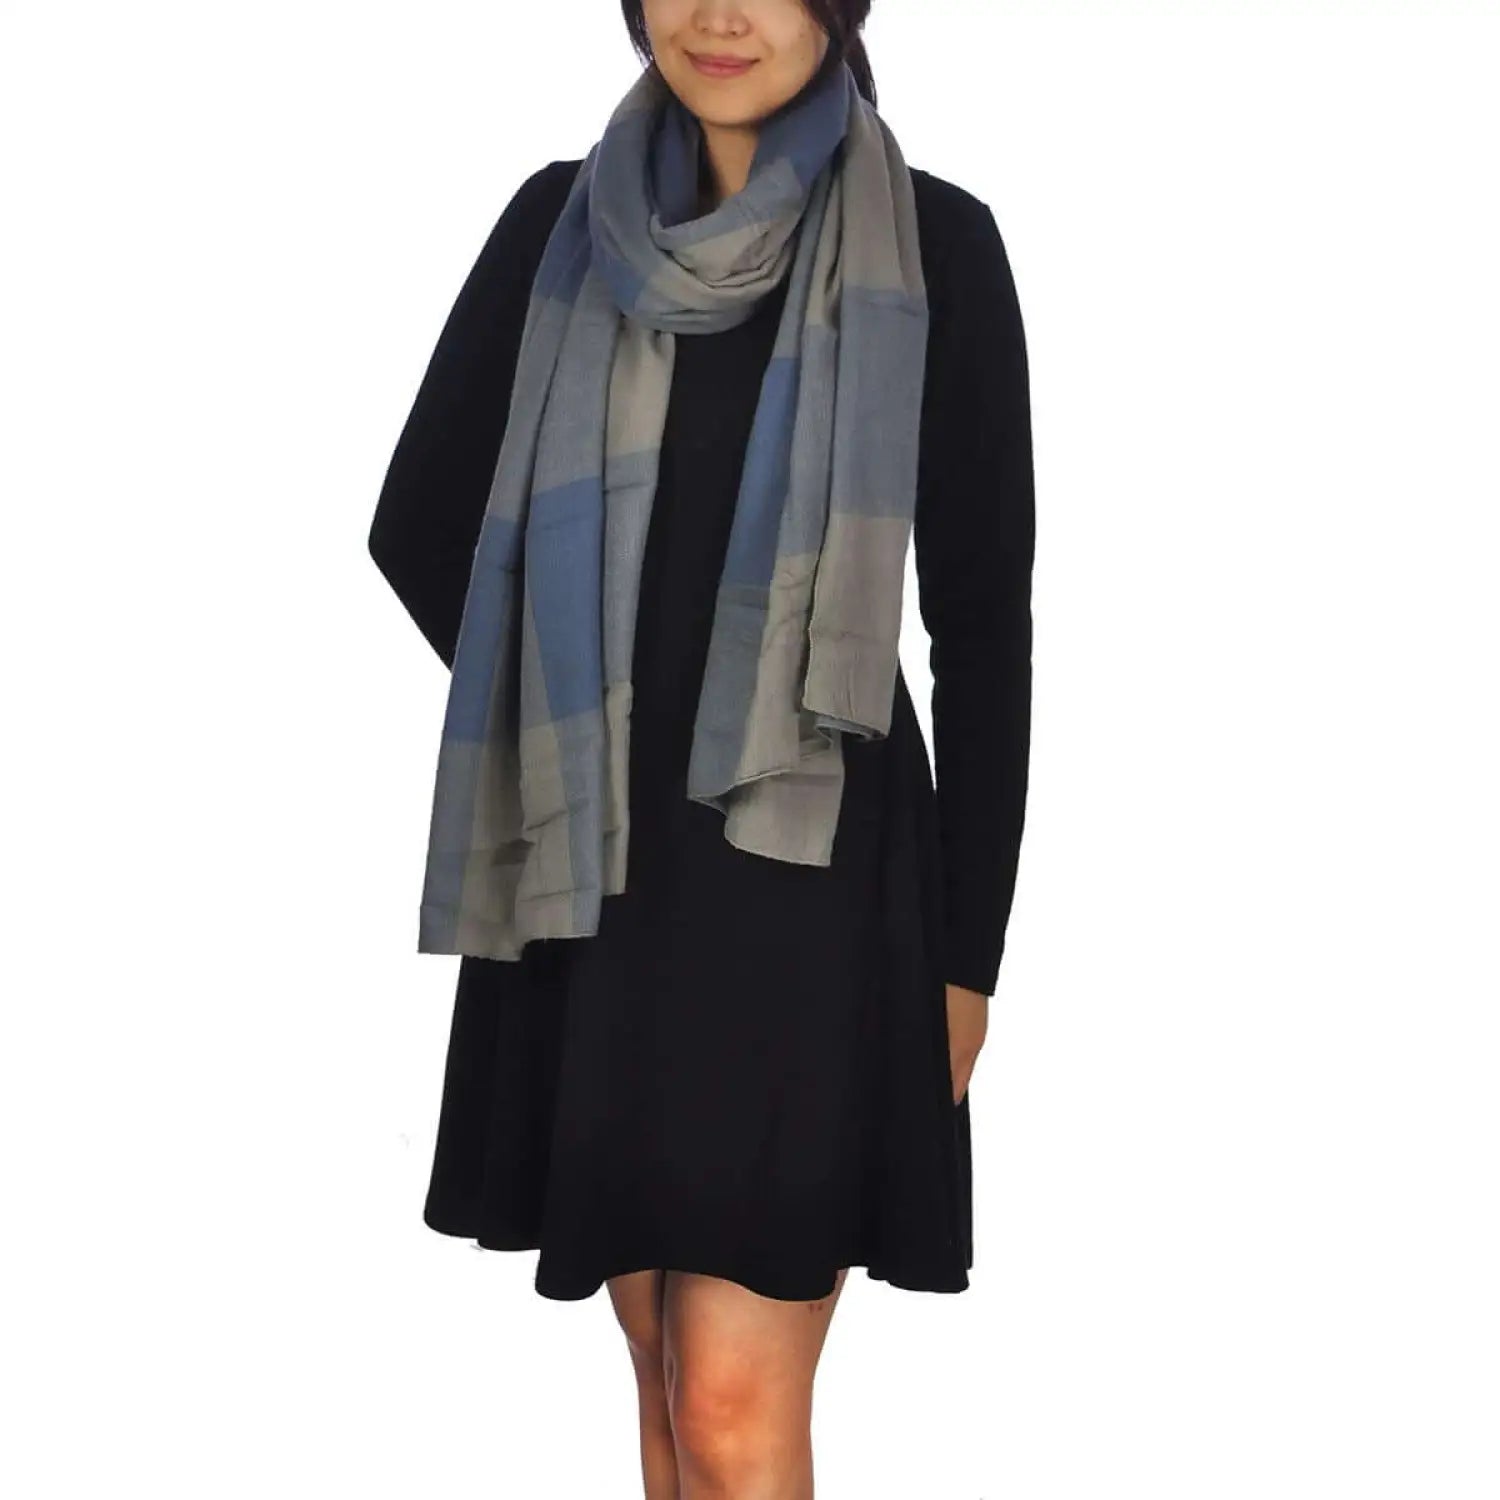 Woman in black dress and scarf modeling Warm Oversized Checked Blanket Scarf